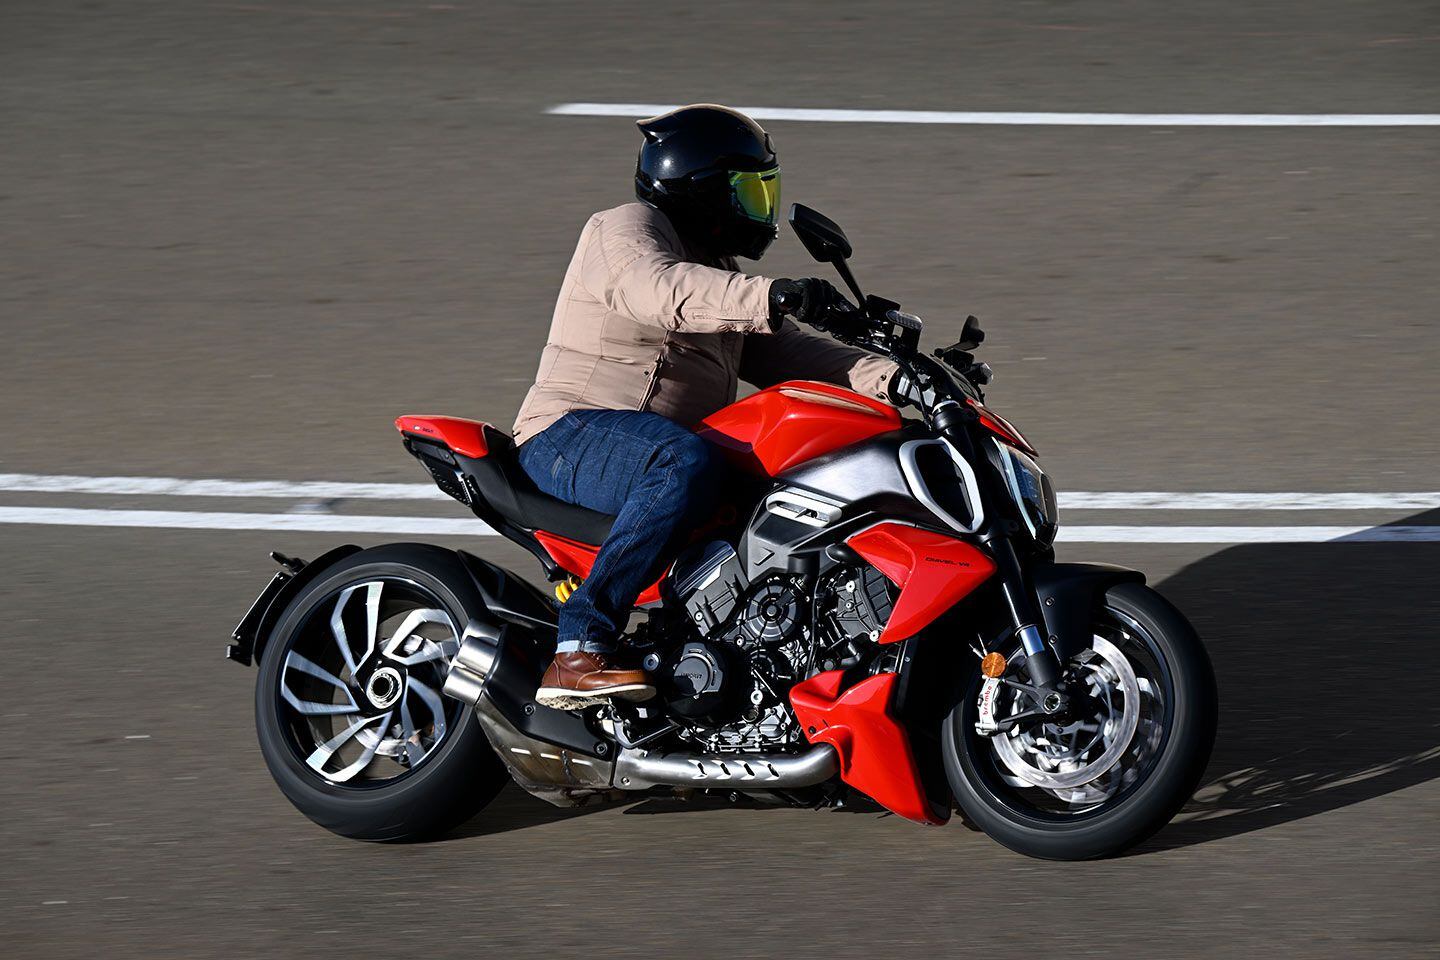 If not for the long single-sided swingarm, you might mistake the Diavel V4 for a burlier Ducati Monster.